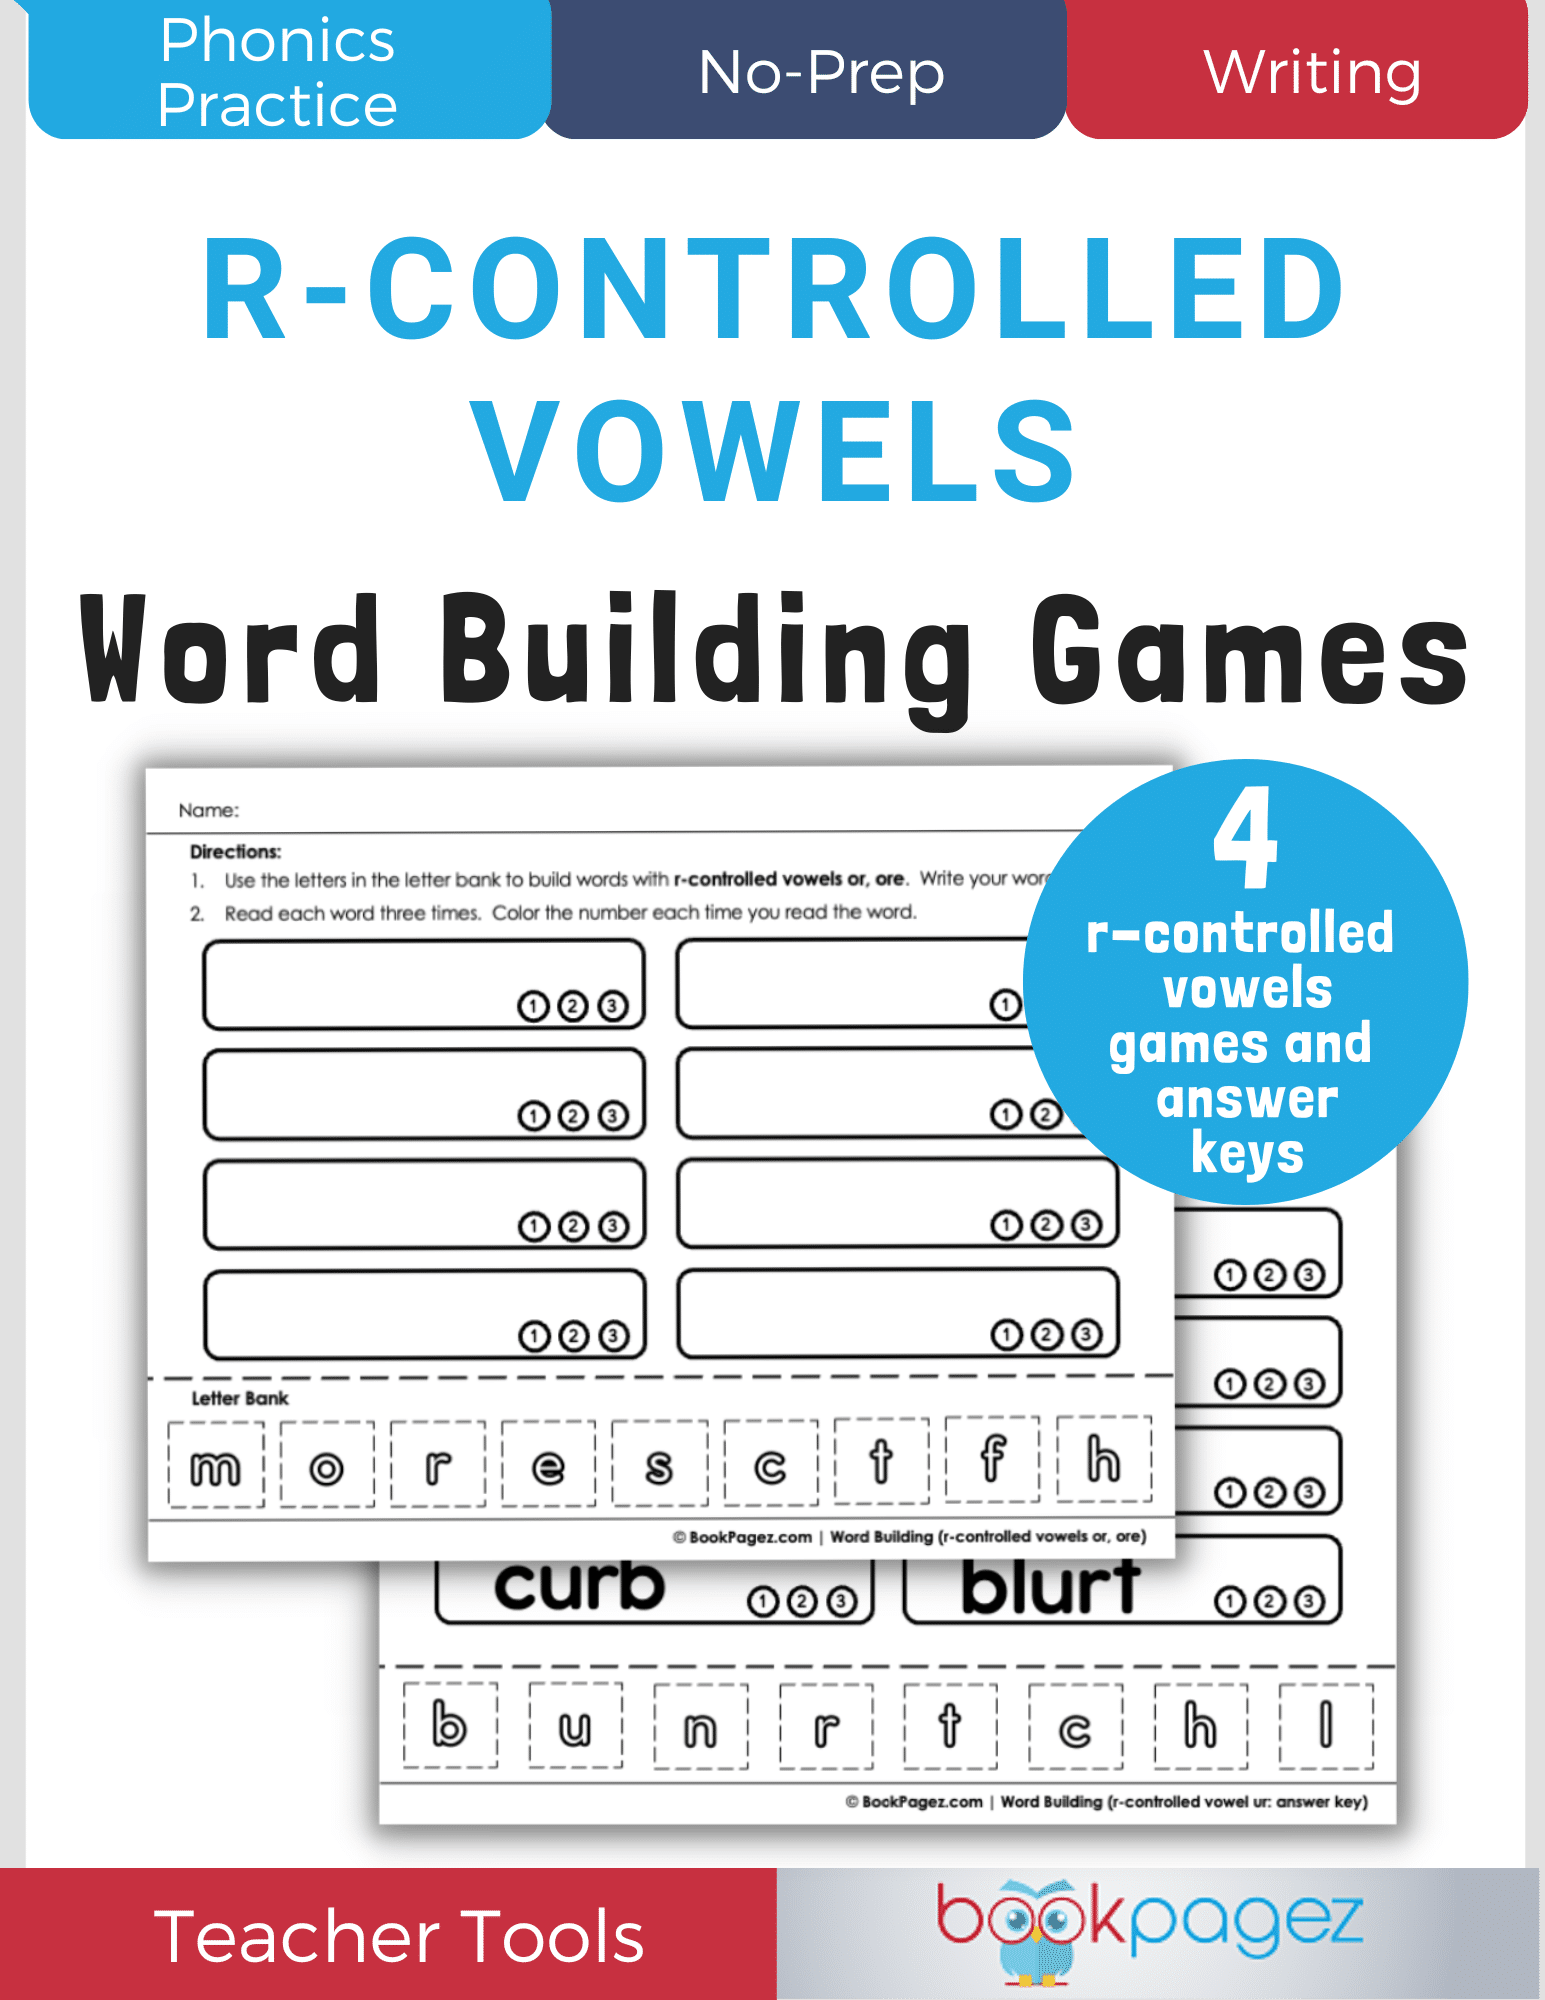 Teaching resource cover for Word Building Games: R-Controlled Vowels